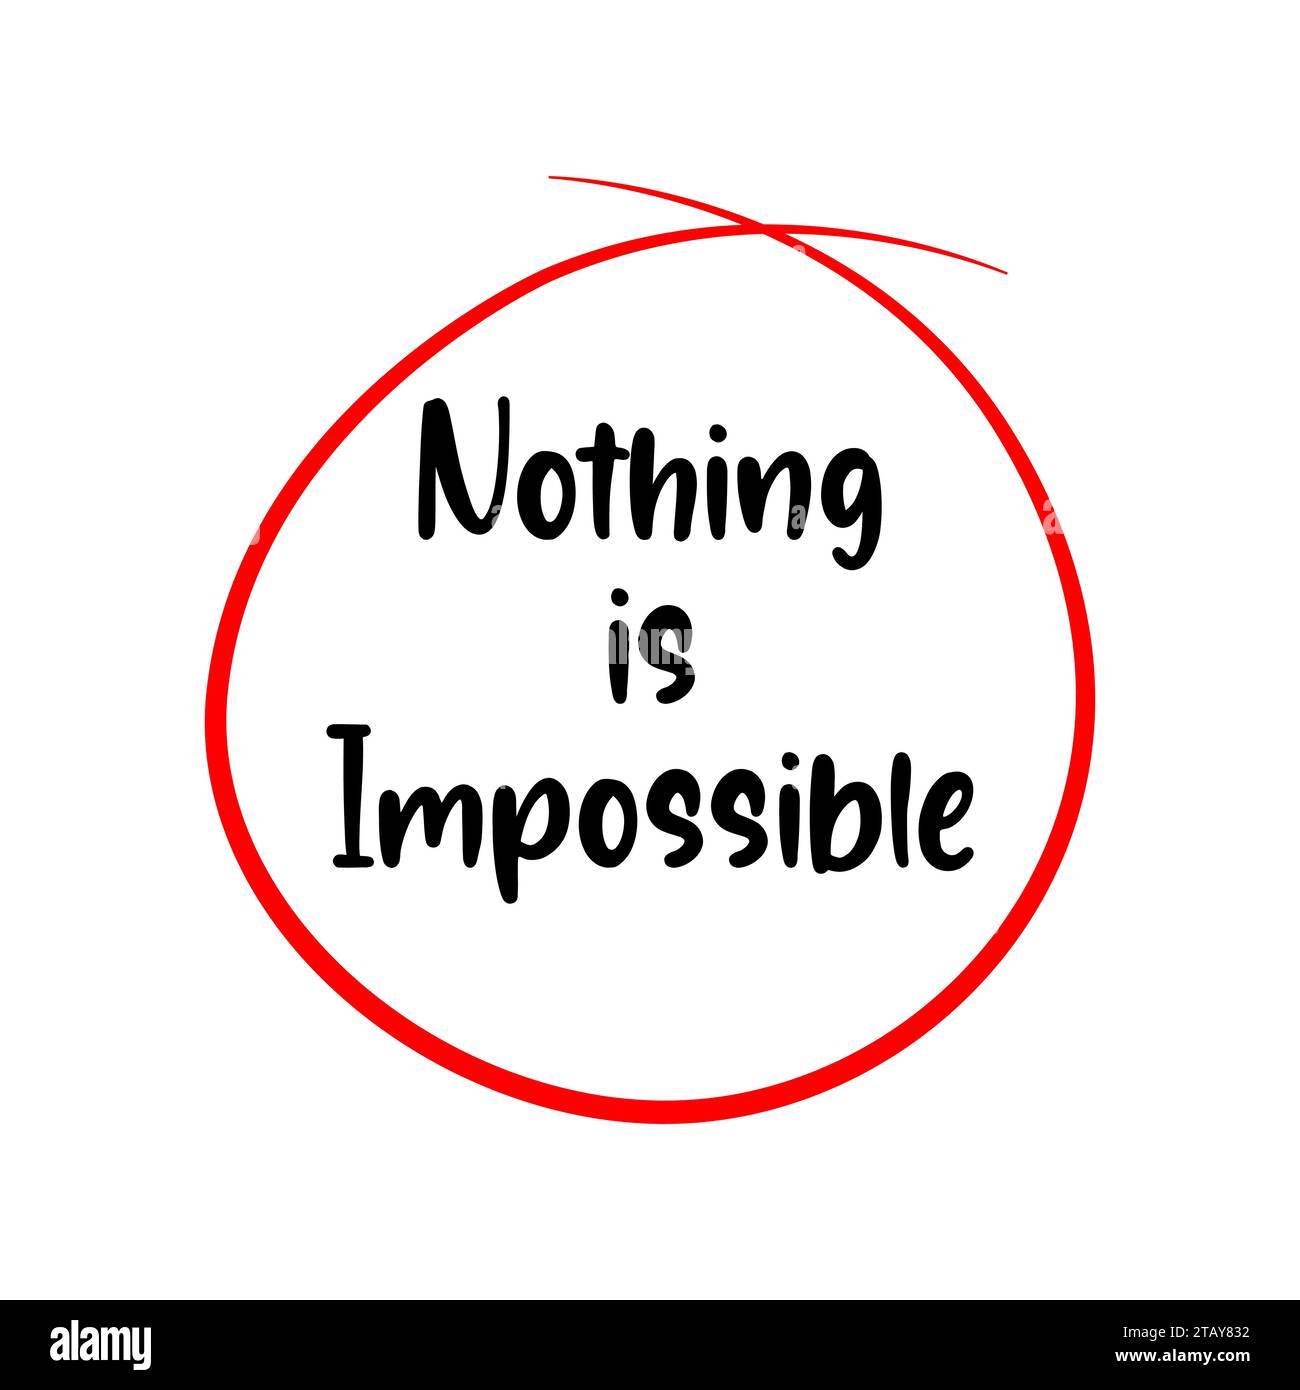 Nothing s impossible text marked on red Stock Vector